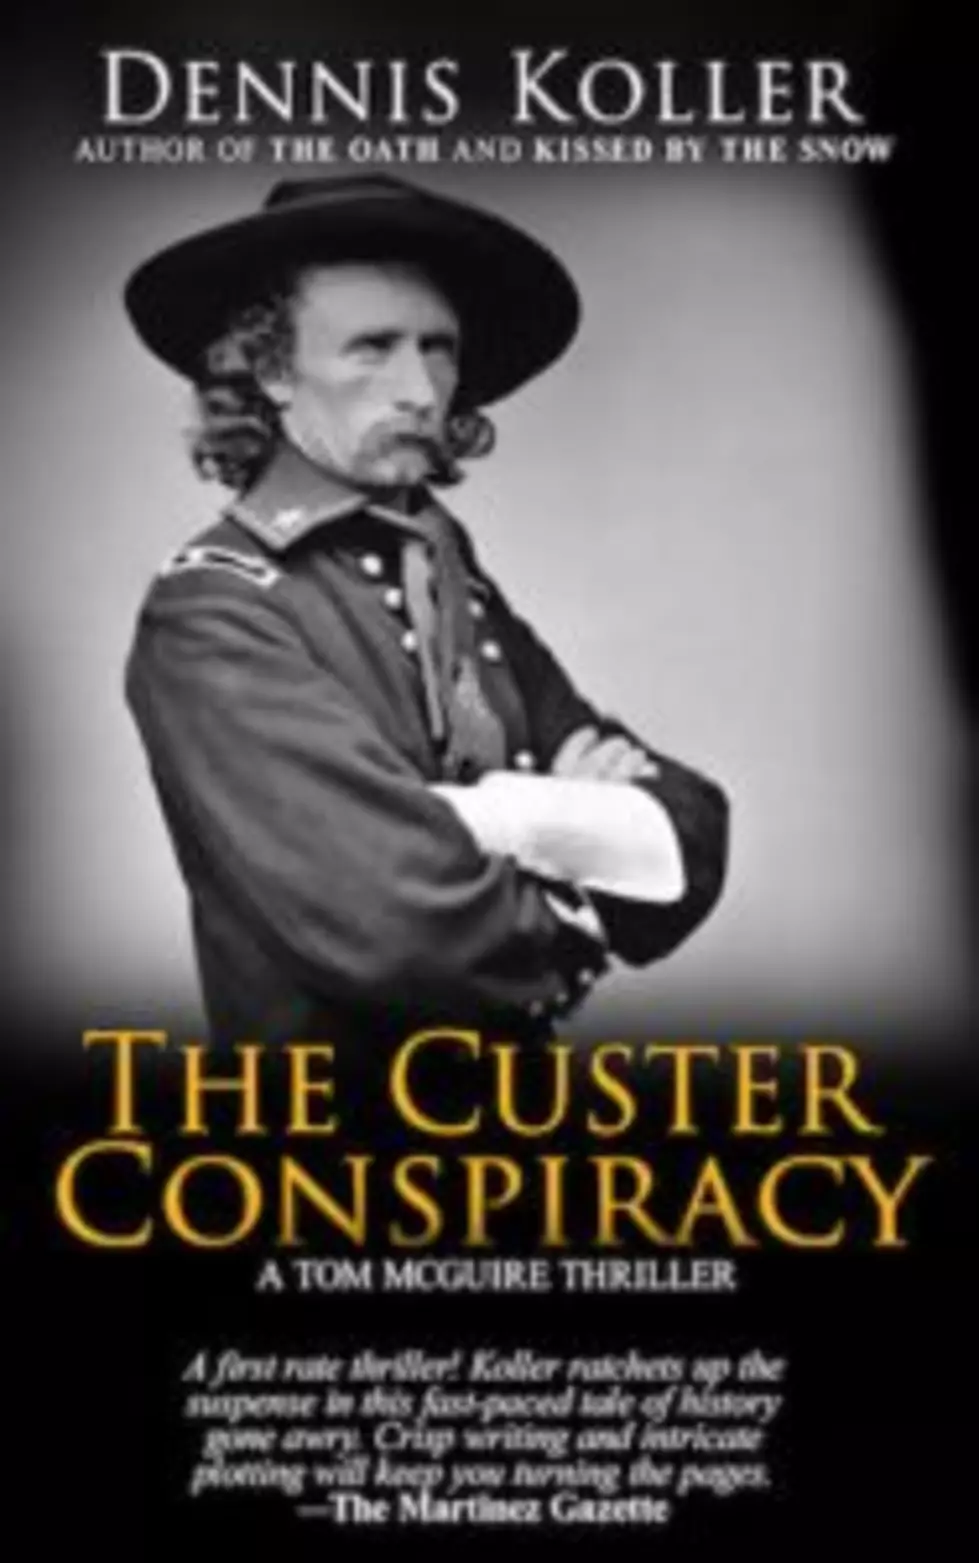 Book review: Mystery centered on Gen. Custer misses the mark